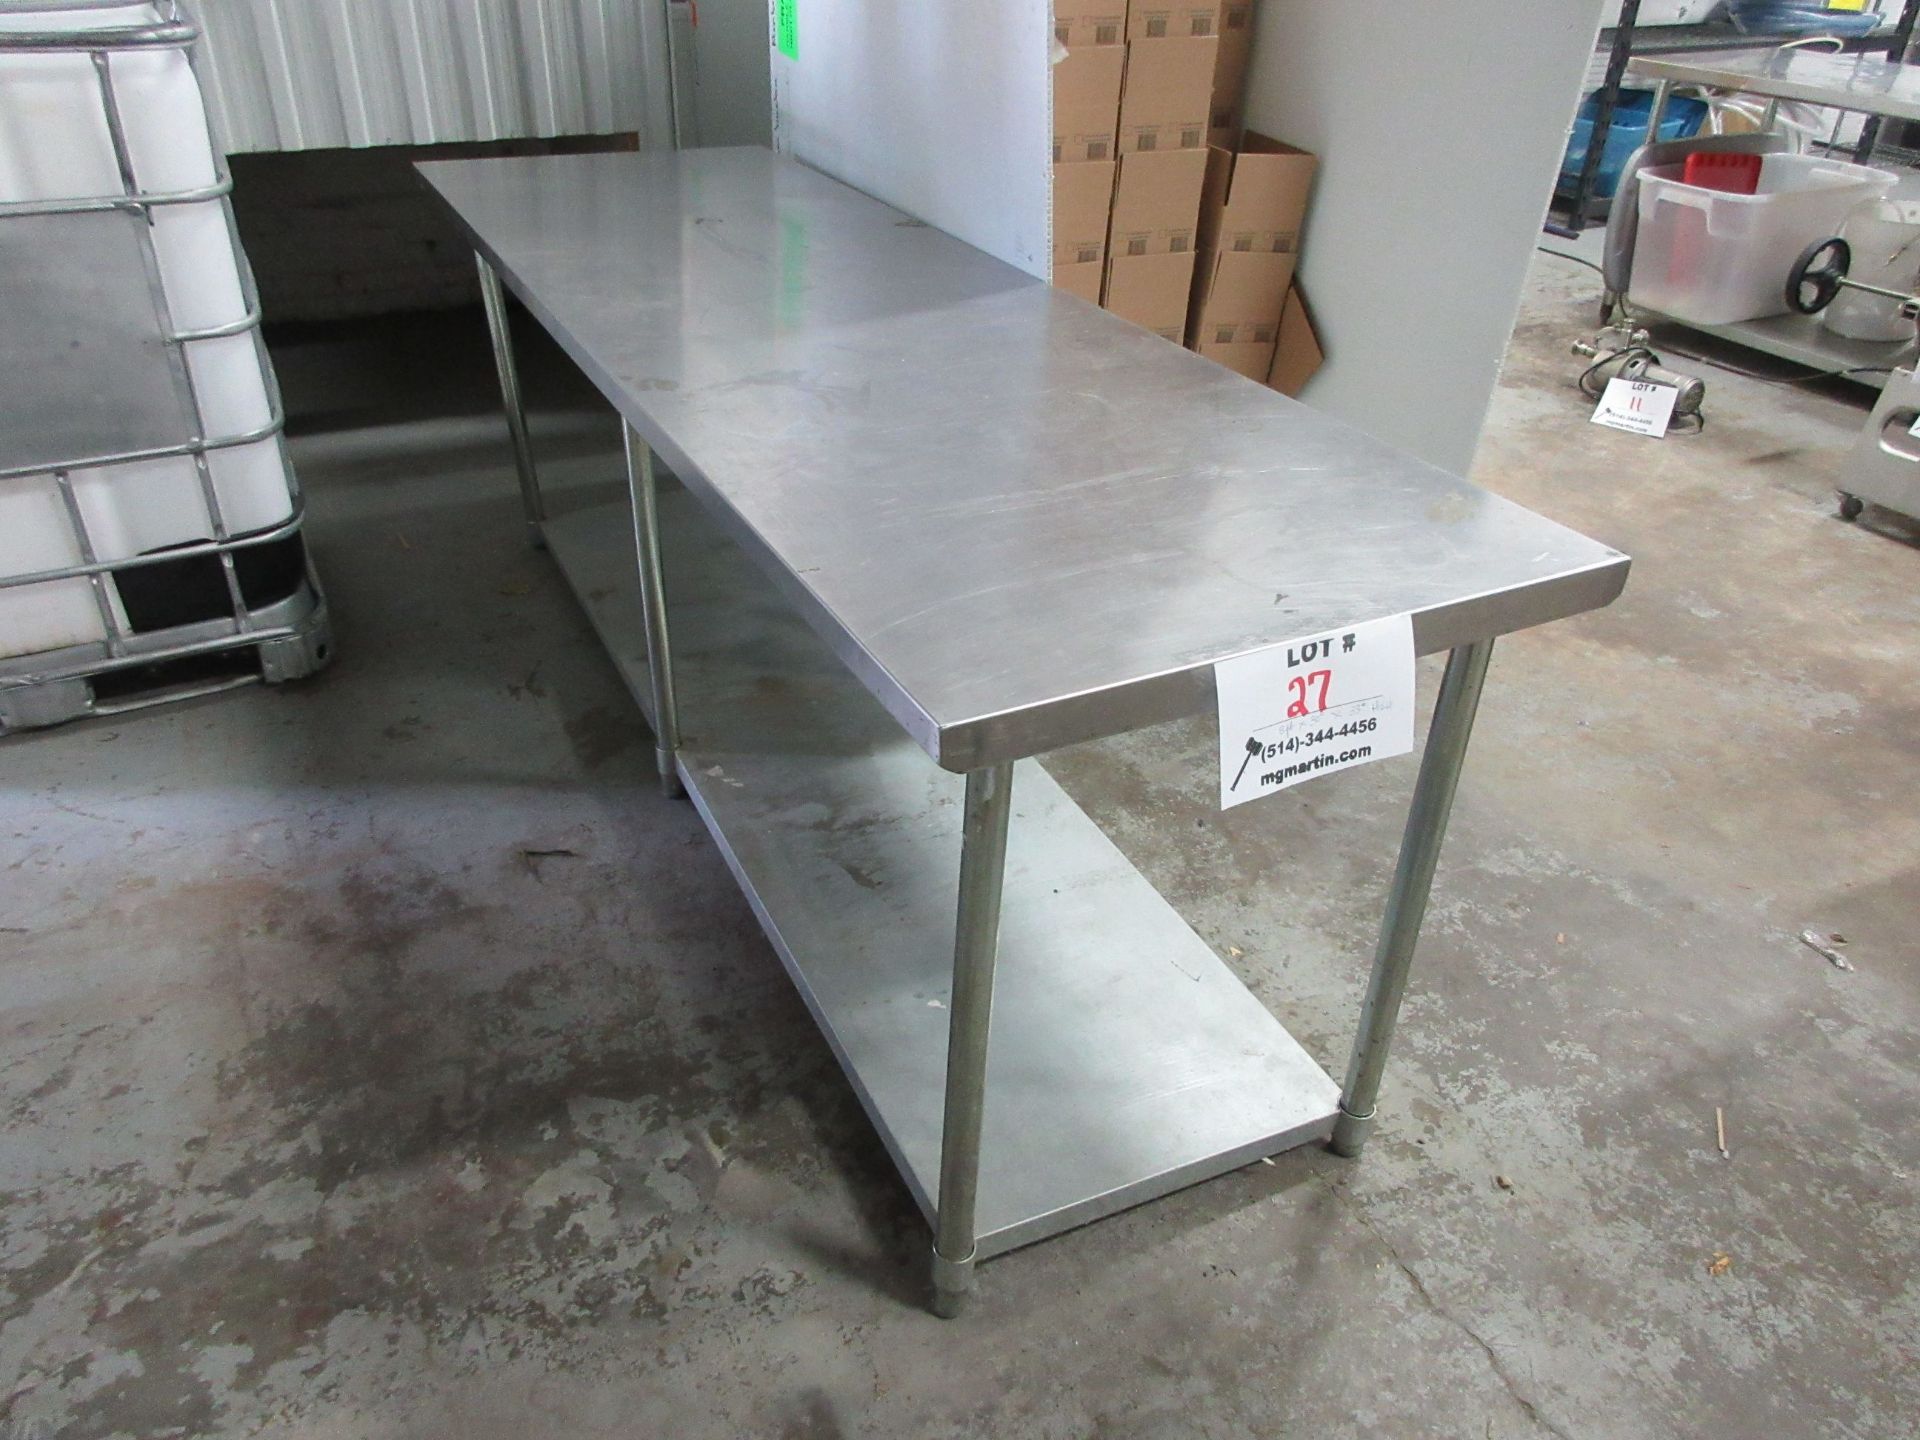 Stainless steel table 8 ft x 30" x 33" high (aprox)